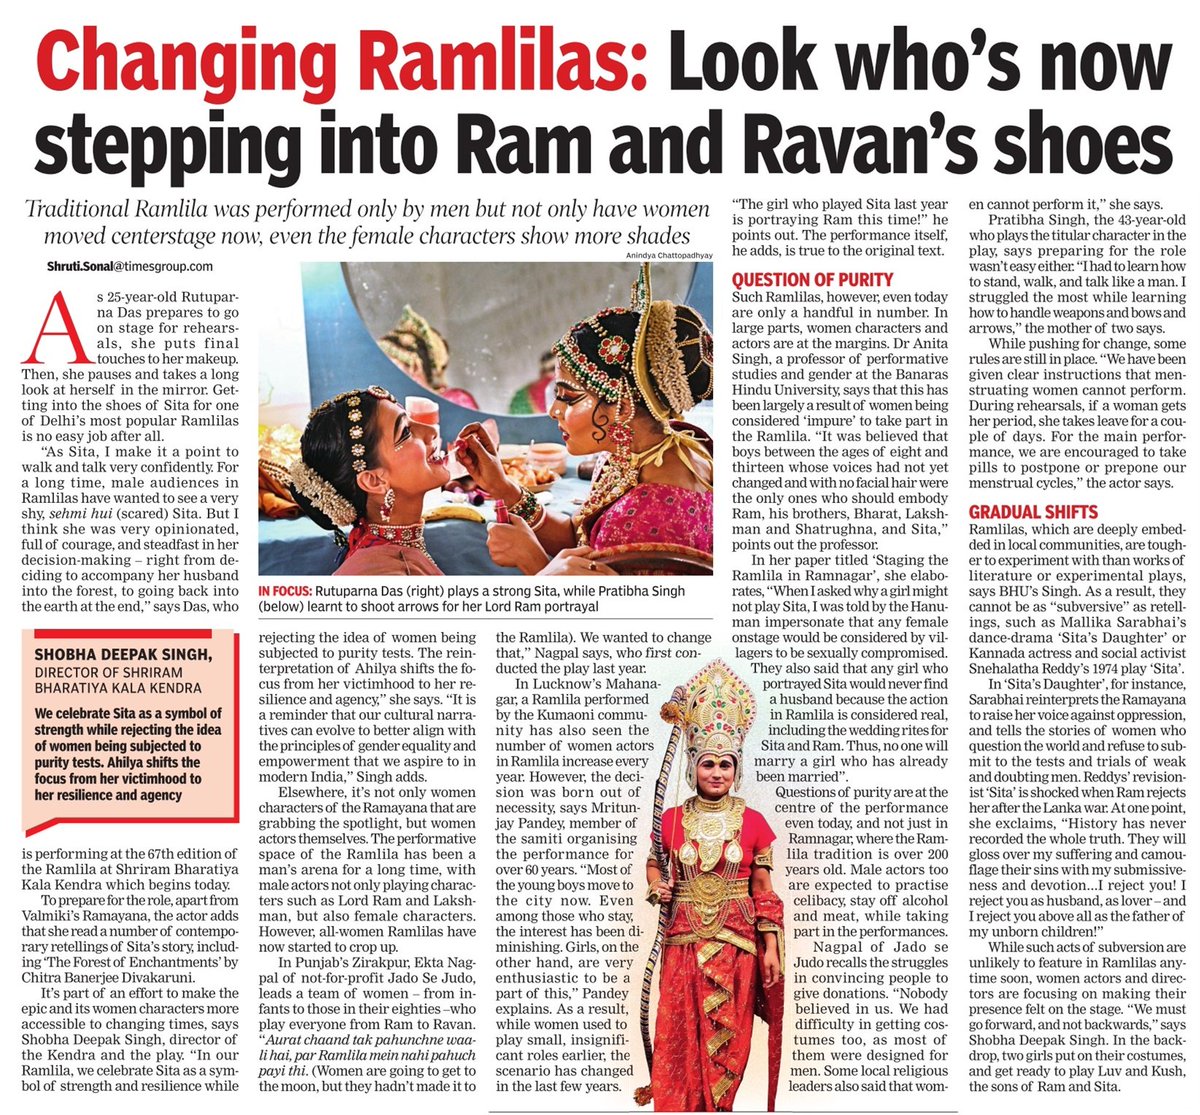 Ramlilas have traditionally been a man's space in India. Not only do male actors play Lord Ram, Lakshman, and others, but also female characters. However, now, battling questions of purity and patriarchy, more and more women actors and characters are taking up the spotlight.